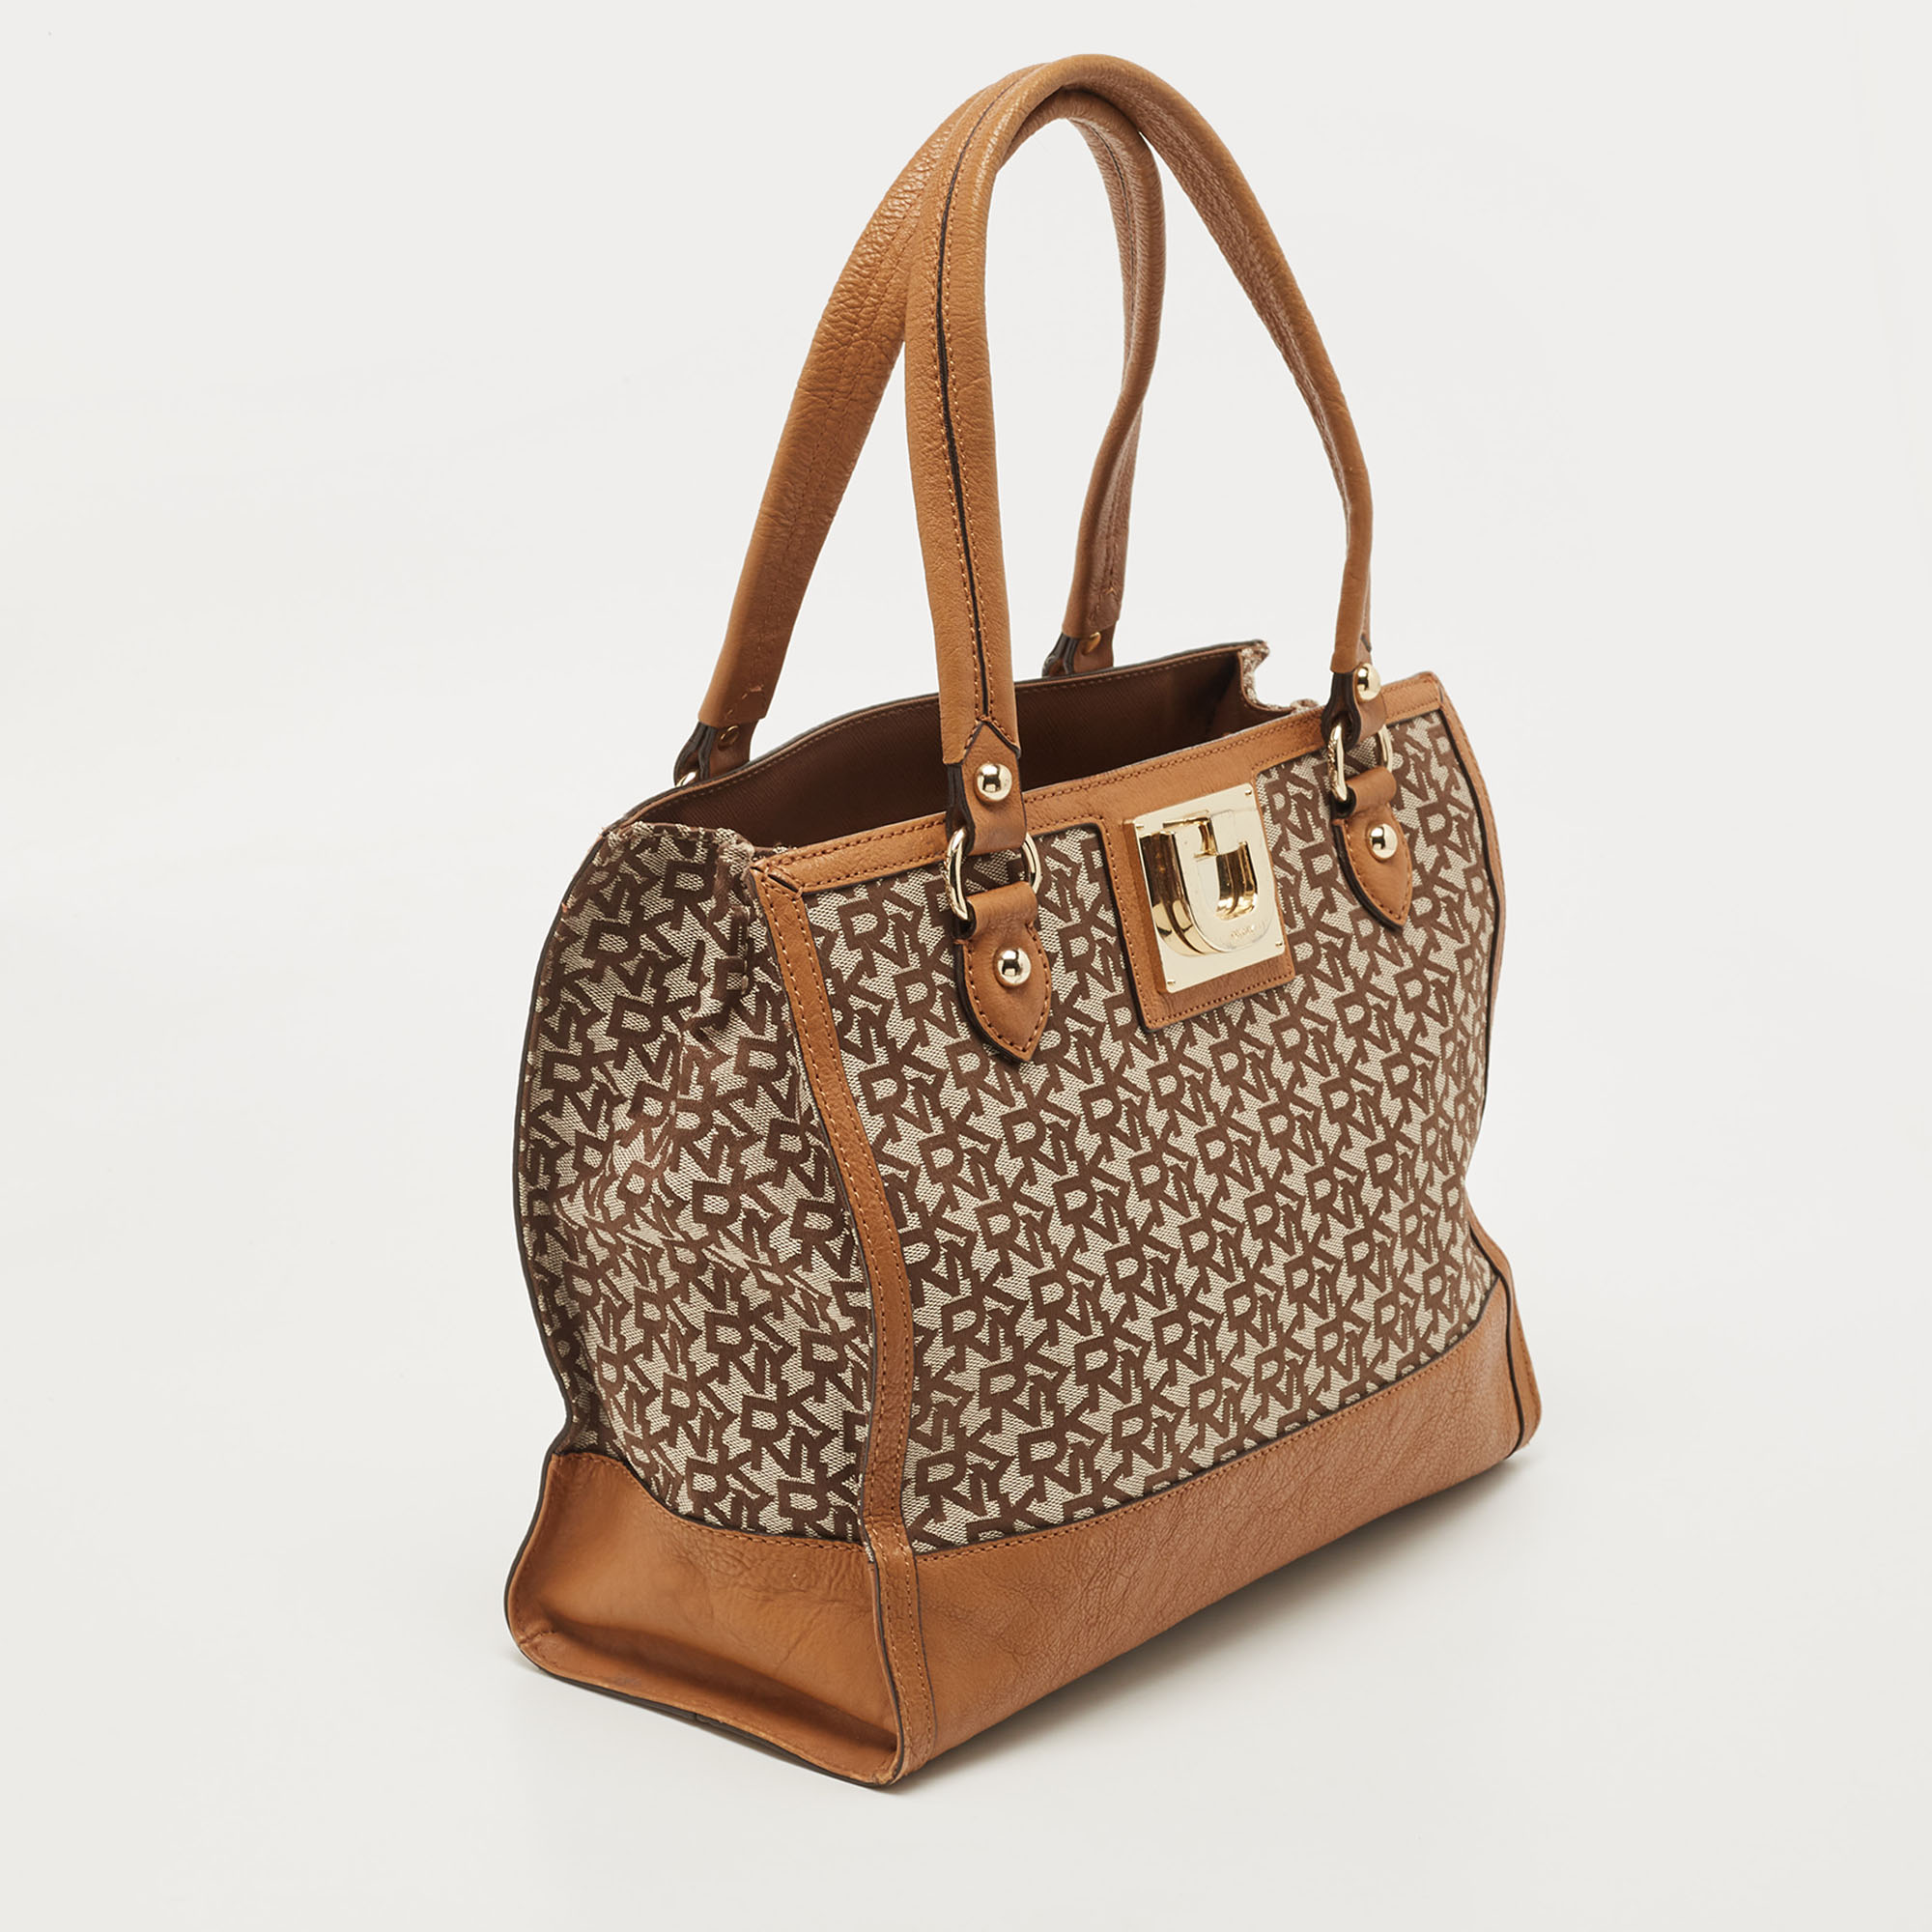 DKNY Brown/Beige Signature Canvas And Leather Tote